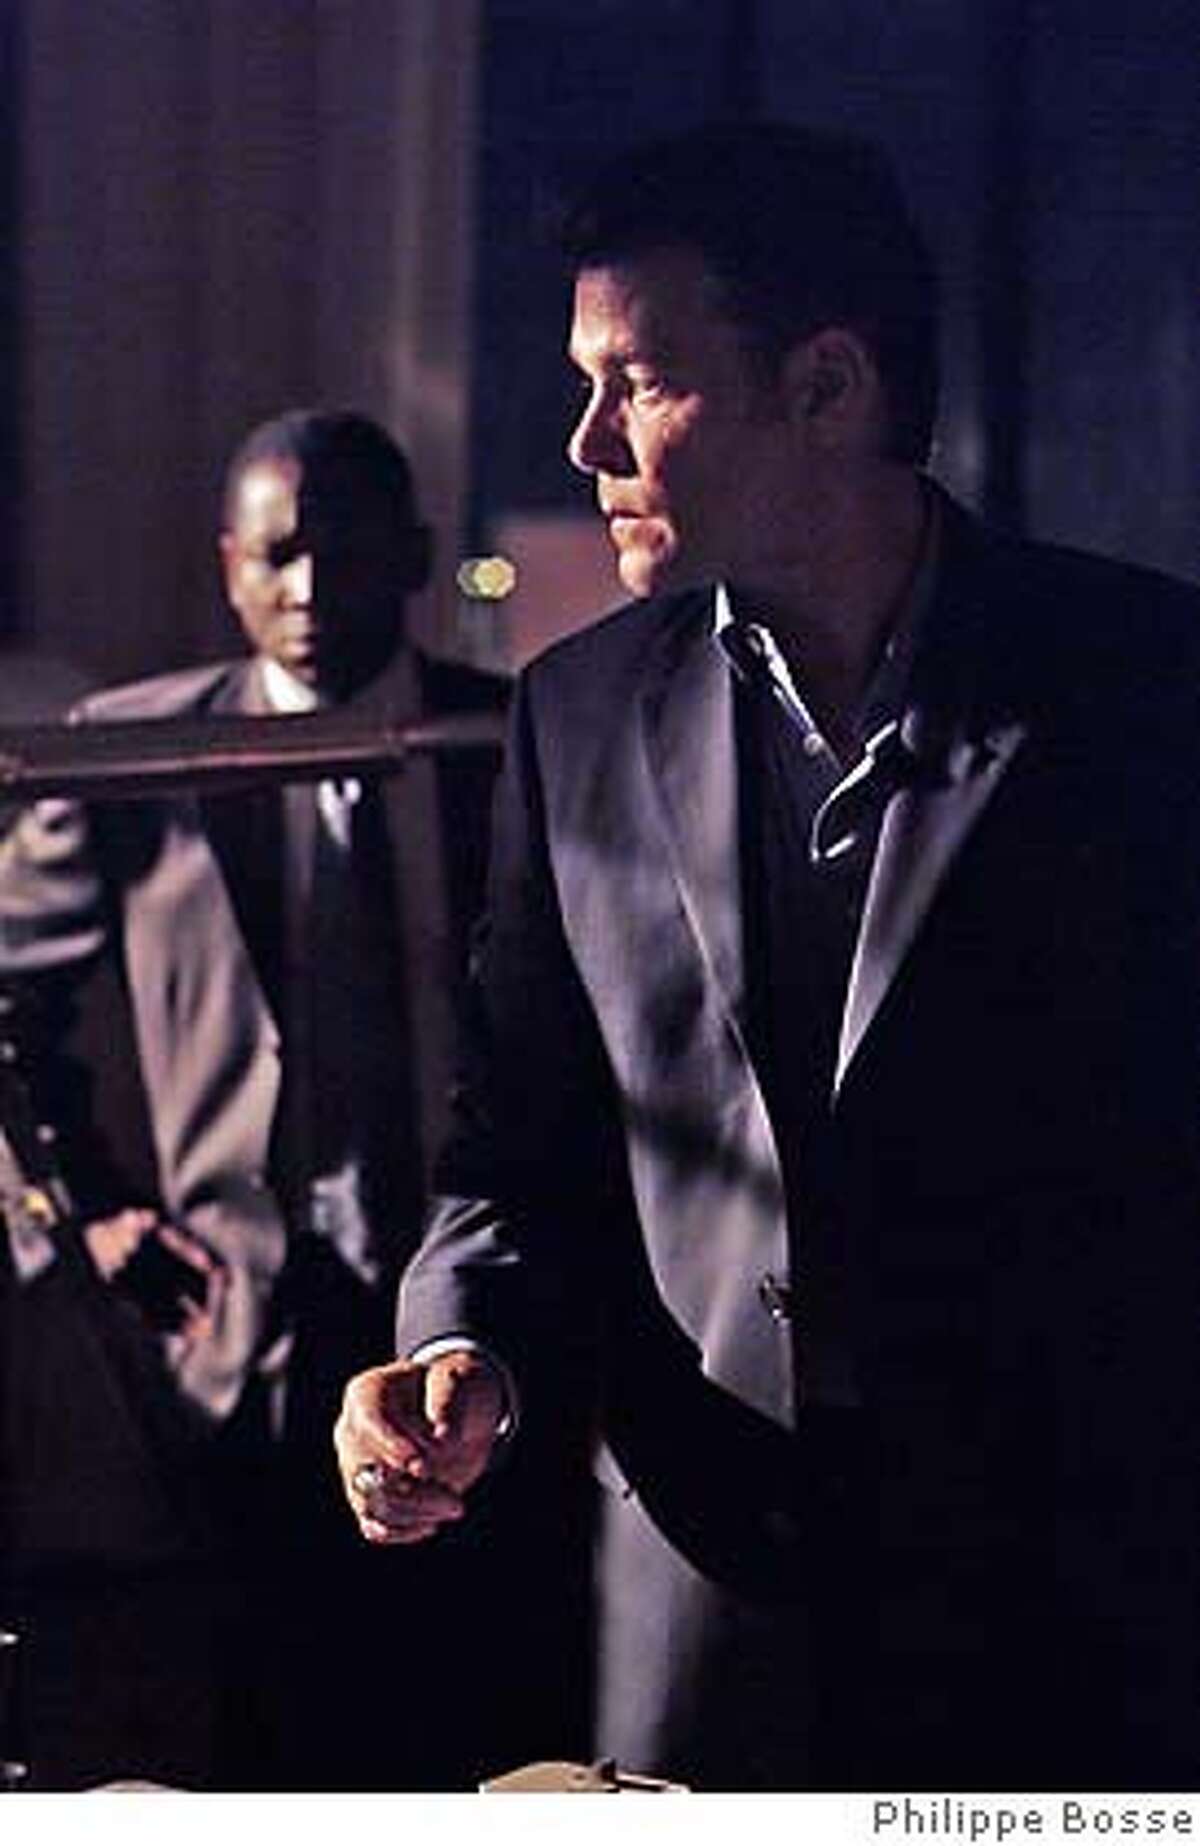 3. Ford Cole (Ray Liotta, foreground) in SLOW BURN. Photo credit: Philippe Bosse